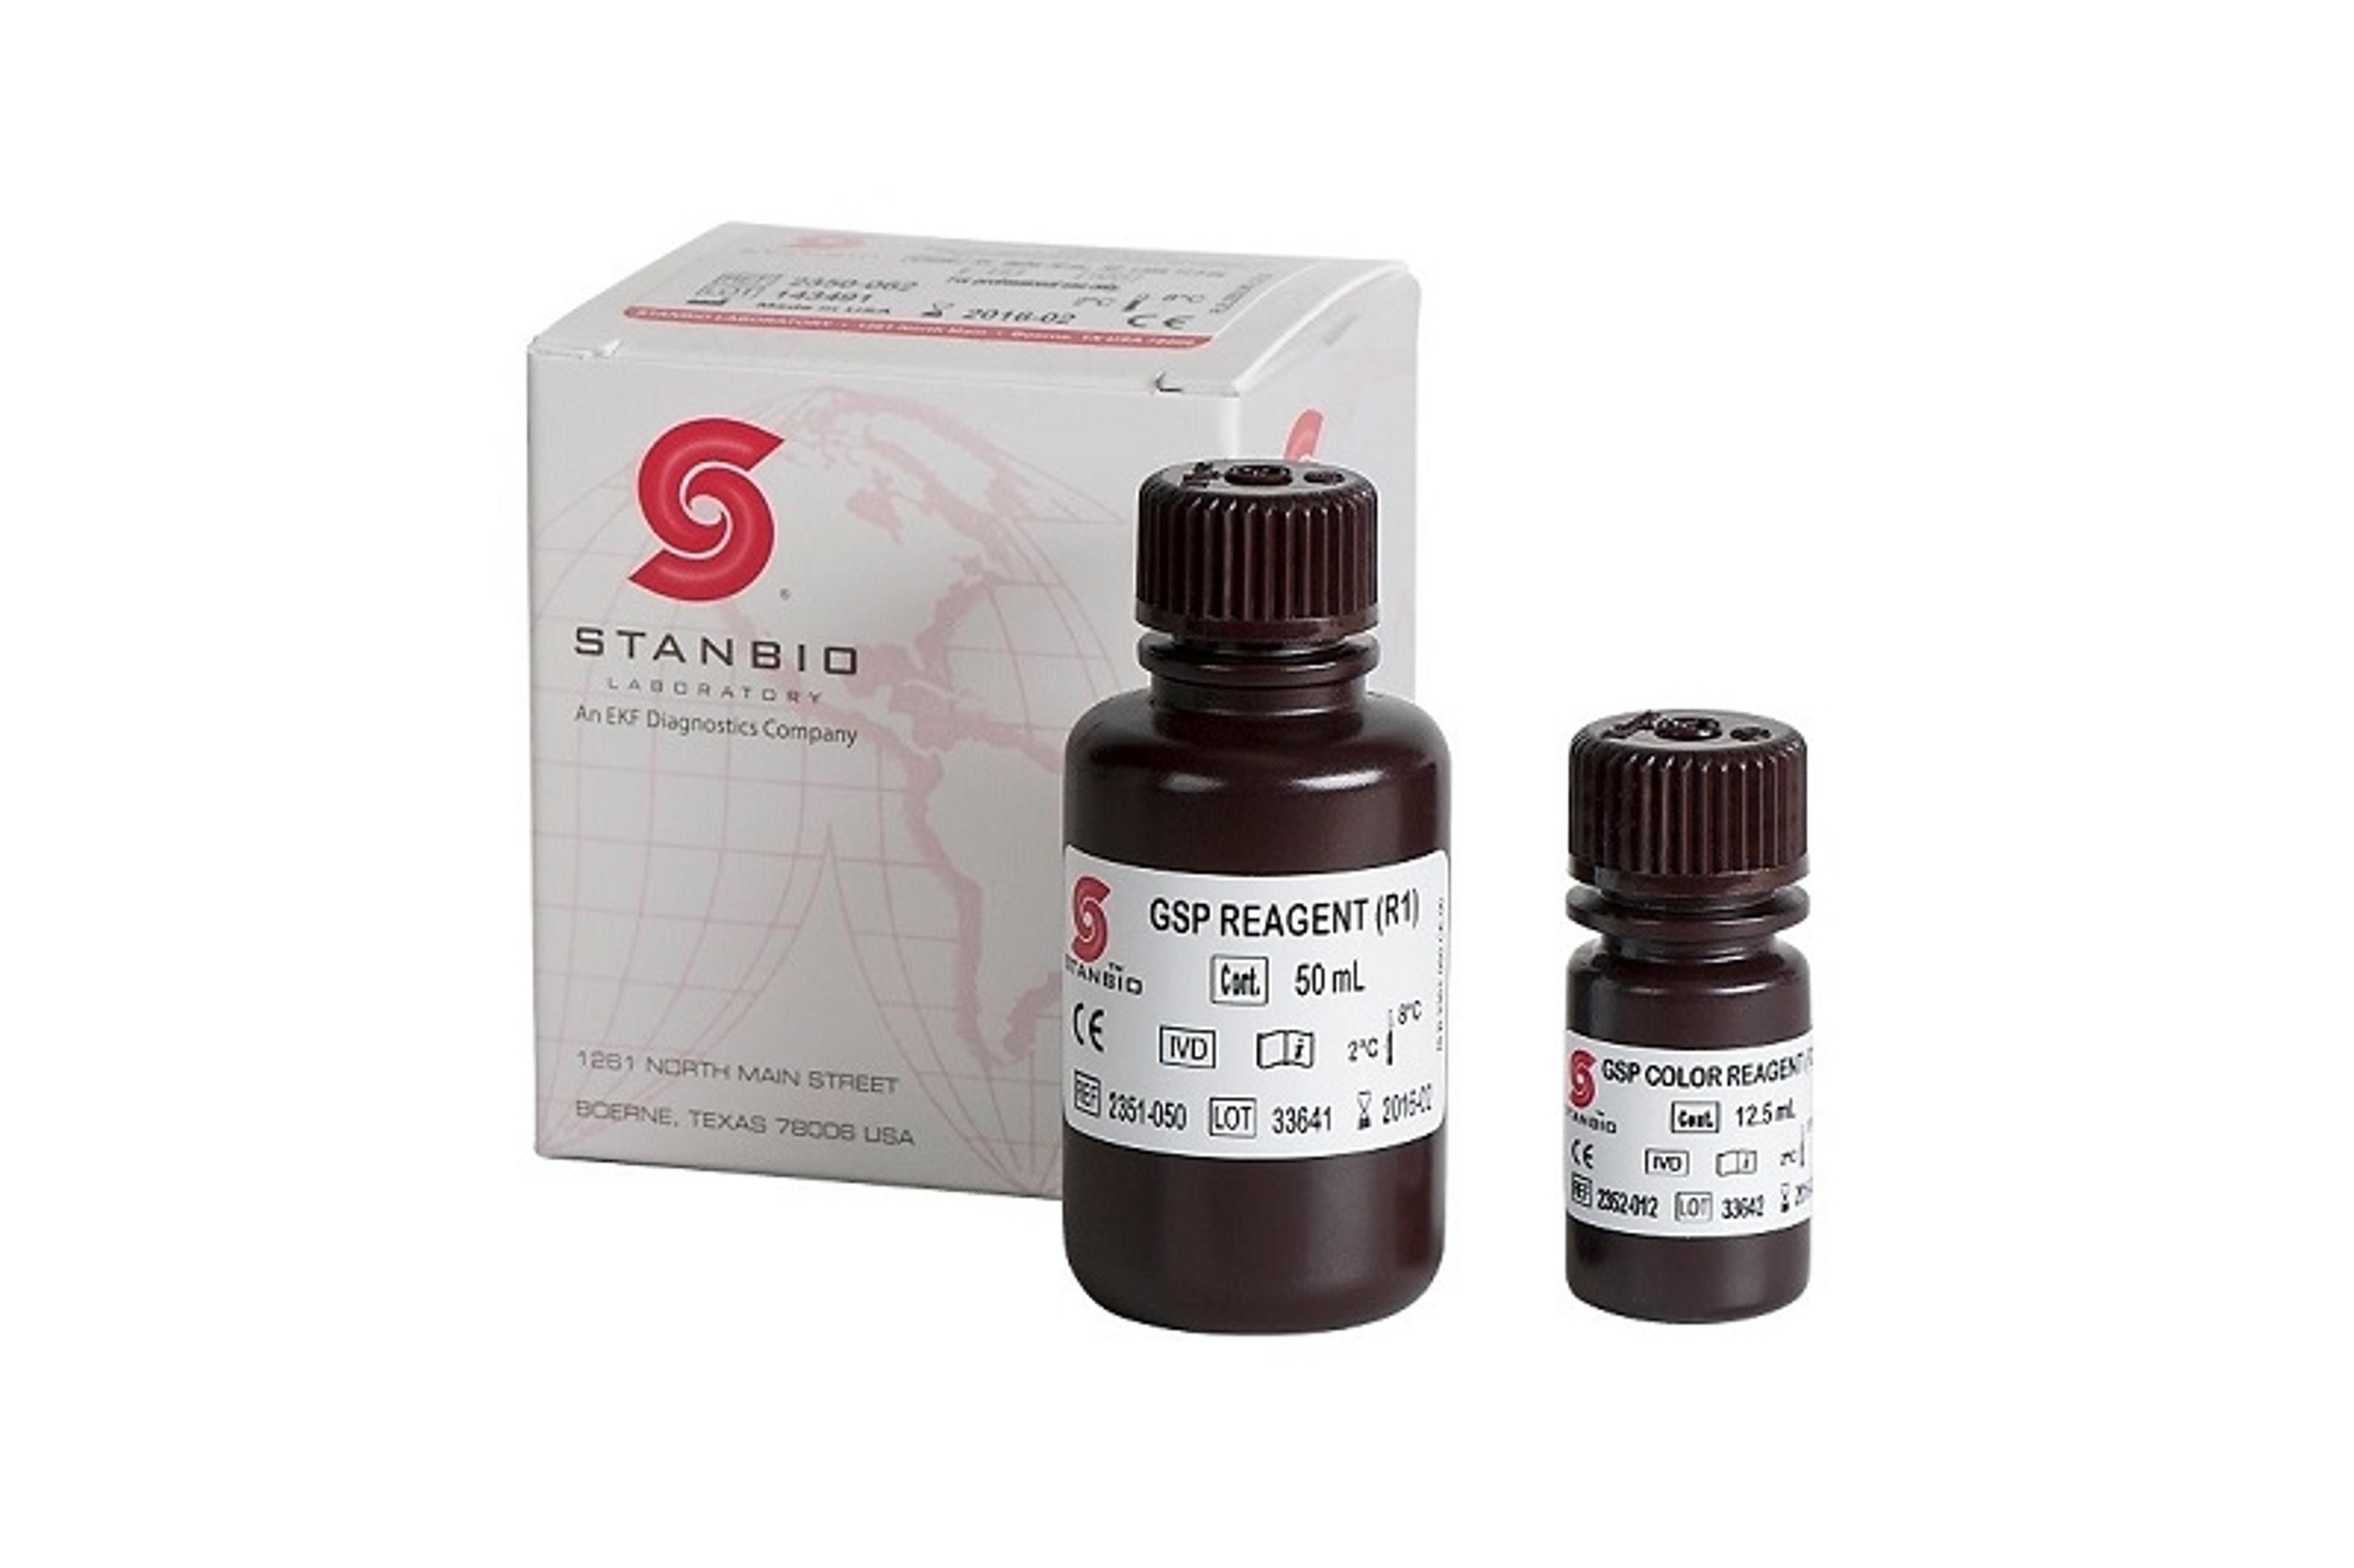 Glycated Serum Protein Reagent